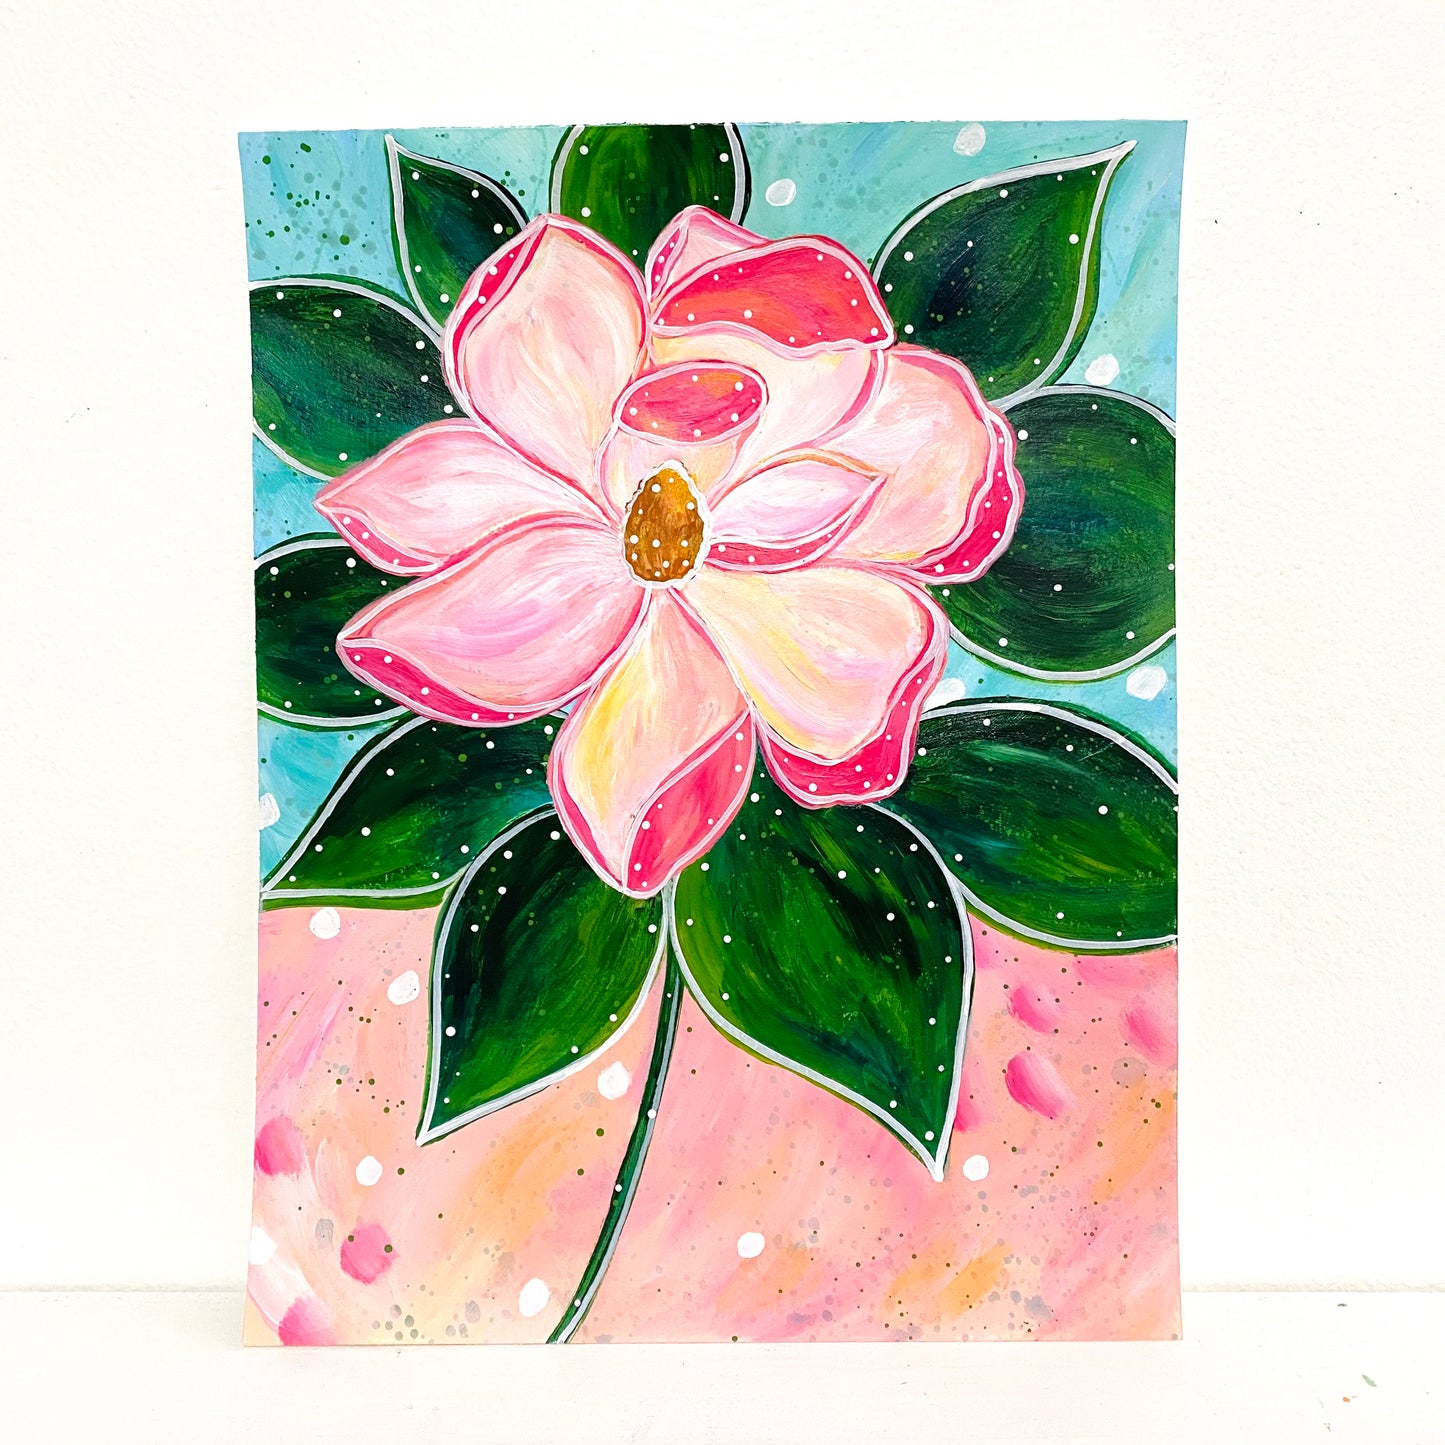 February Flowers Day 10 Magnolia 8.5x11 inch original painting